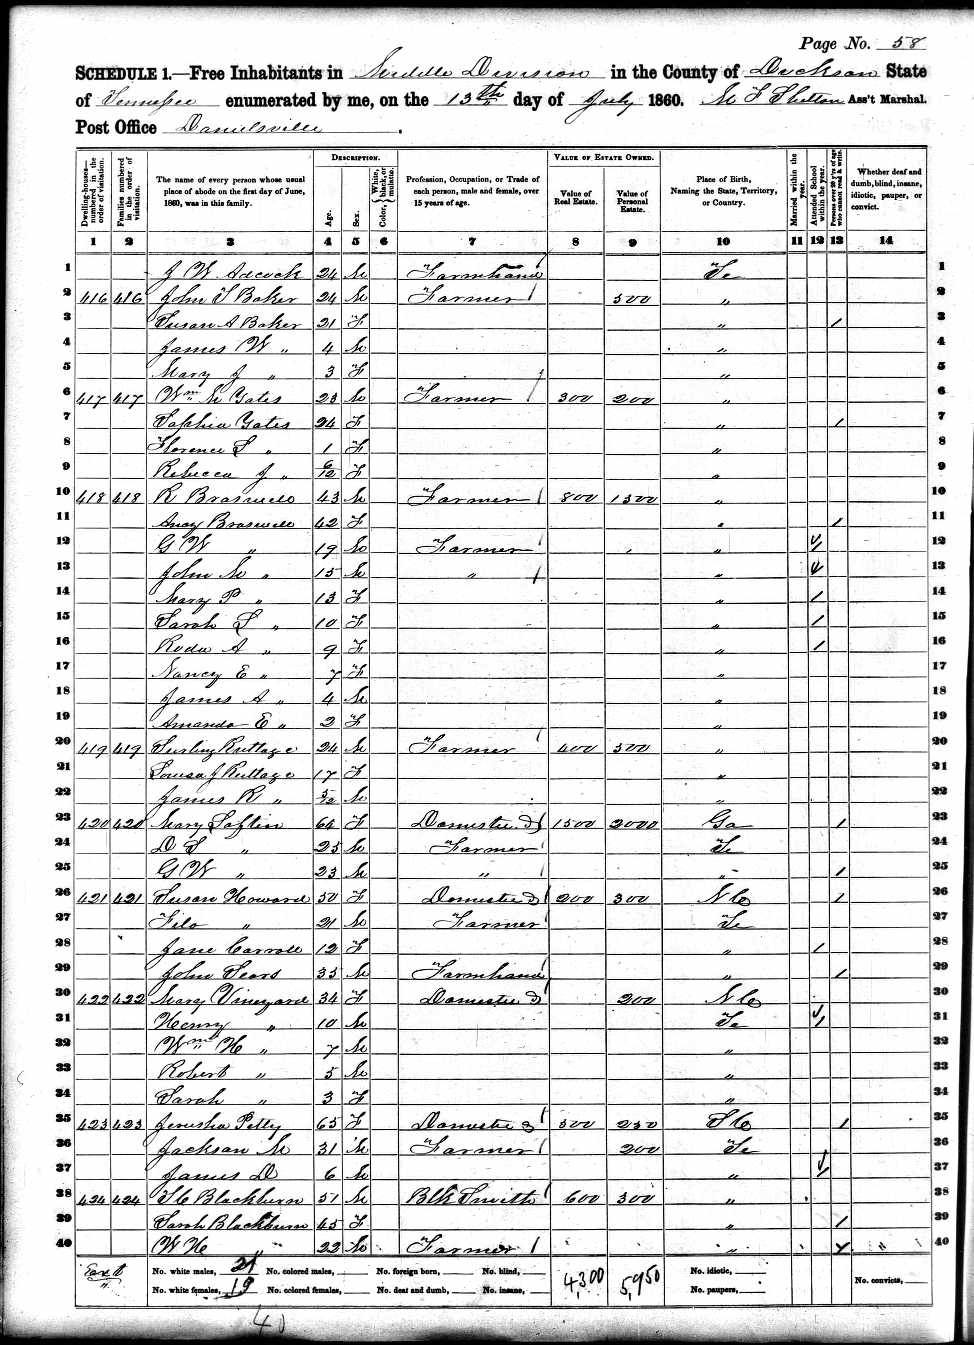 Richmond Brazzell, 1860 Dickson County, Tennessee, census